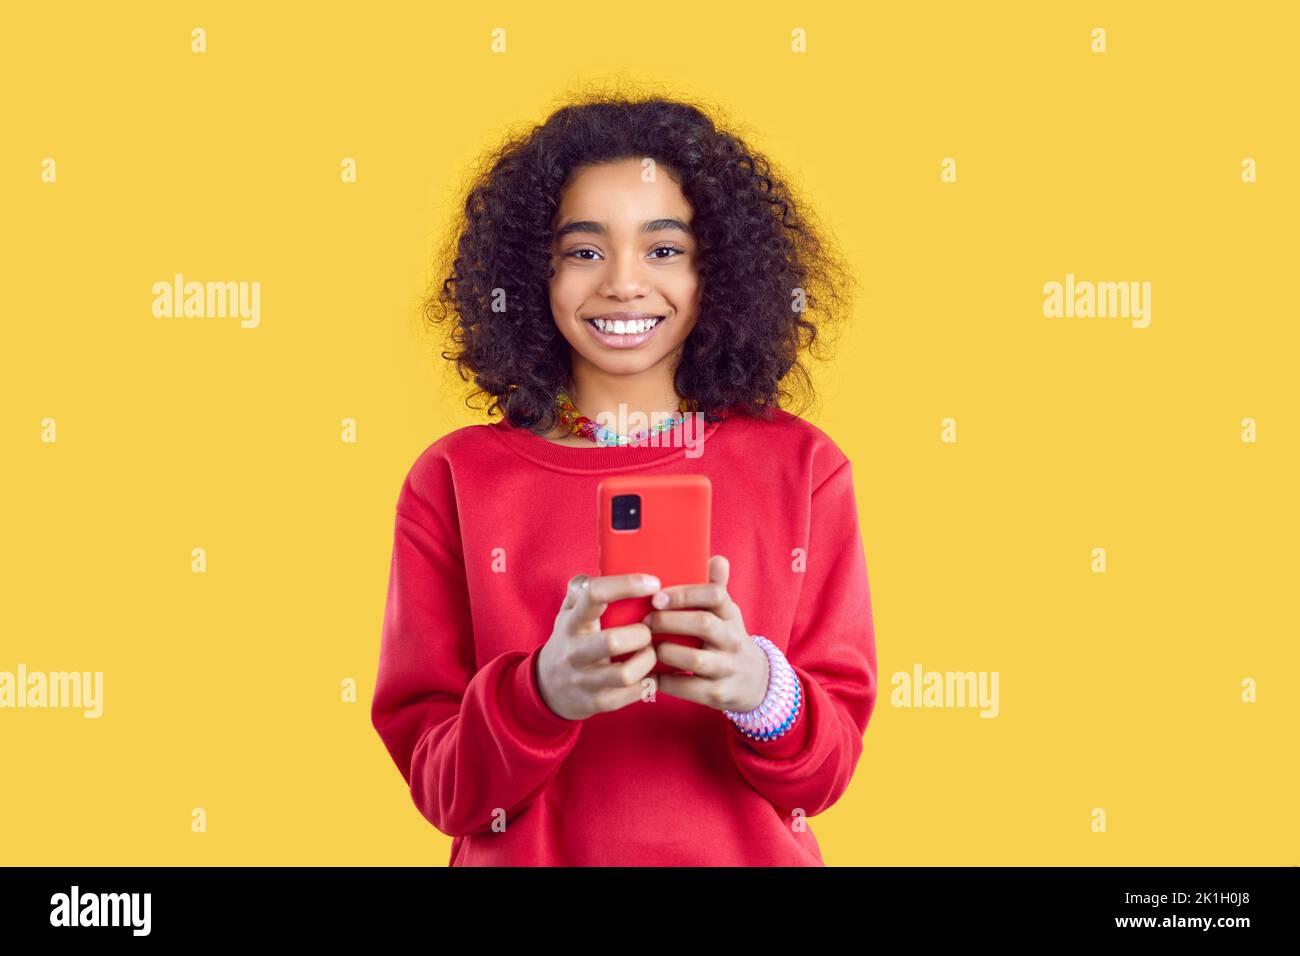 Smiling ethnic preteen girl uses modern mobile phone for online games or to communicate with friends Stock Photo